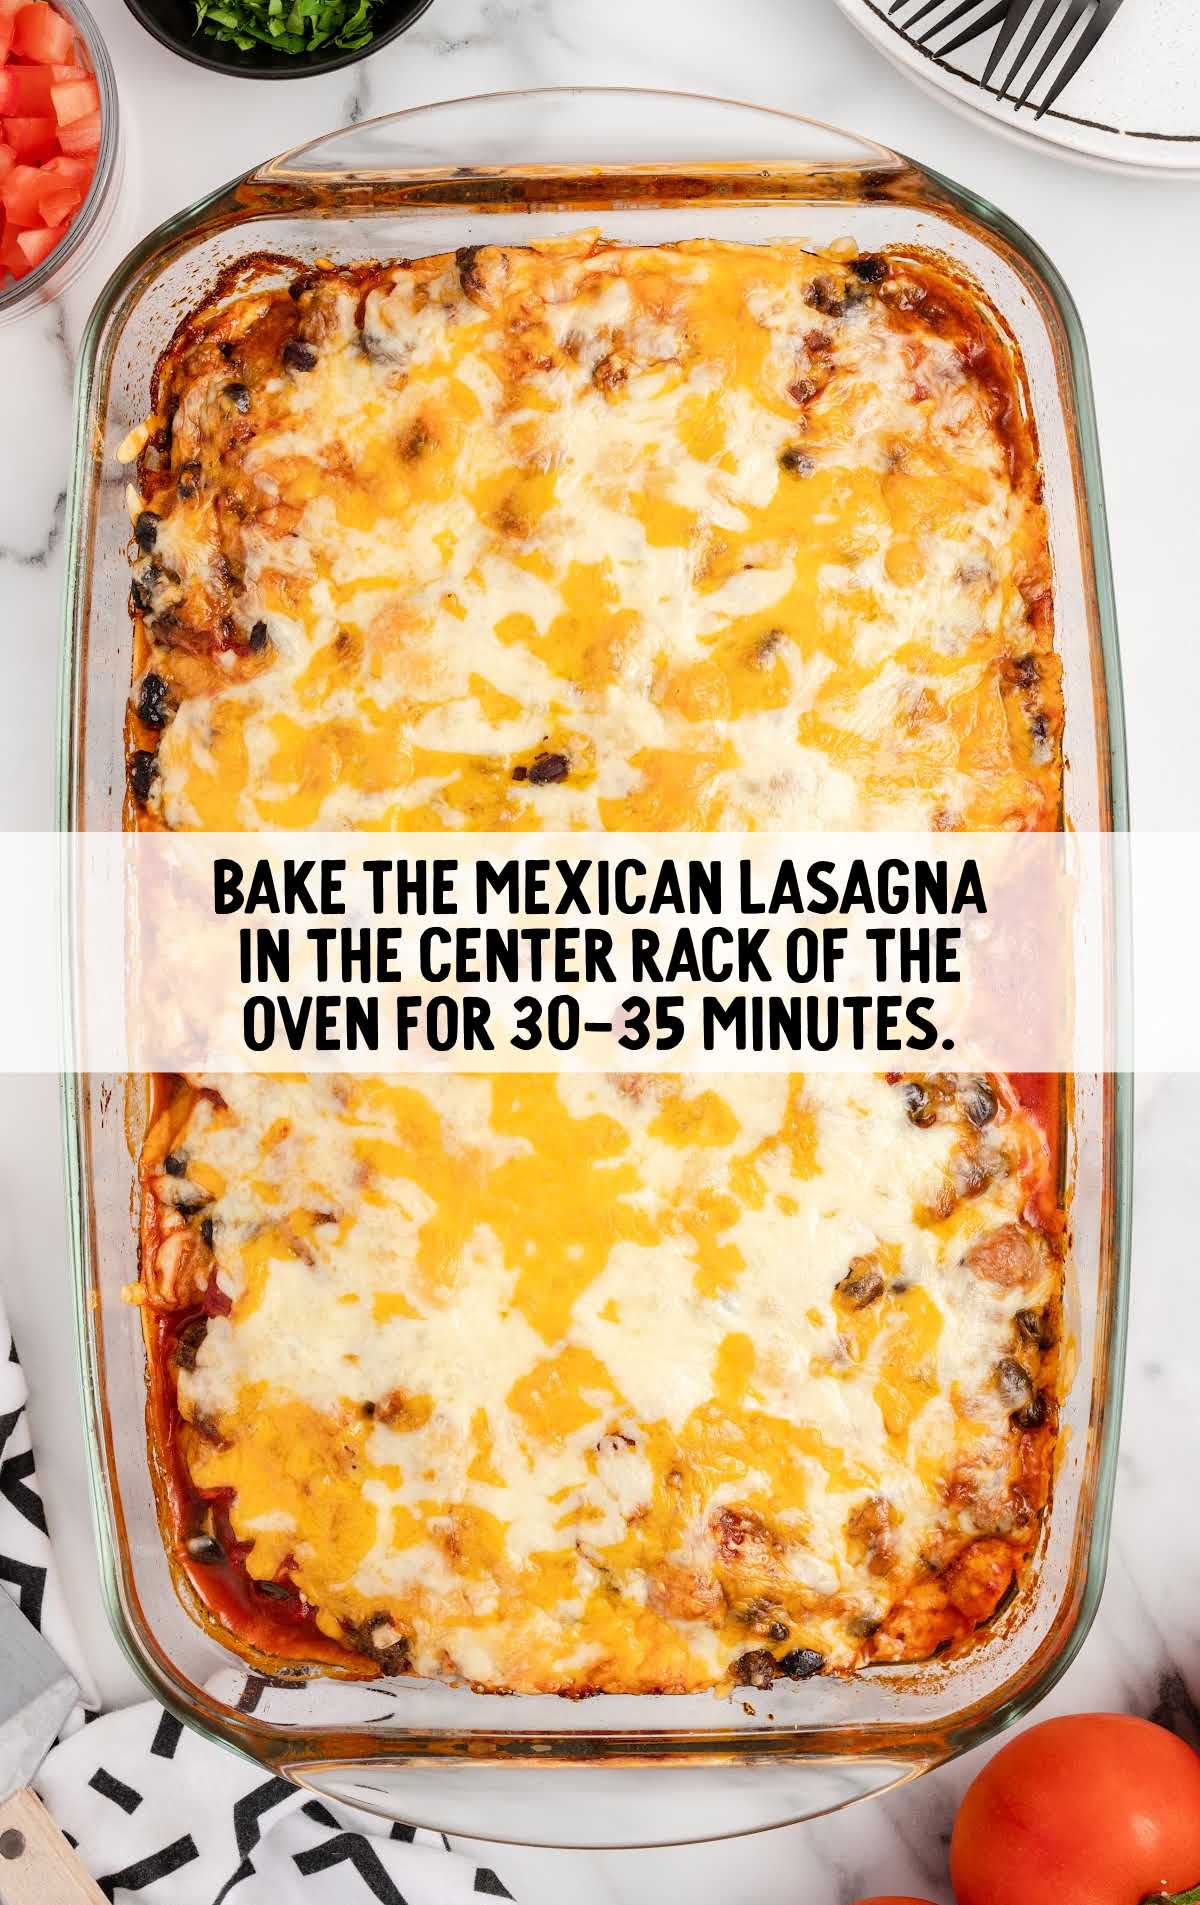 lasagna baked in the middle rack for 20-35 minutes